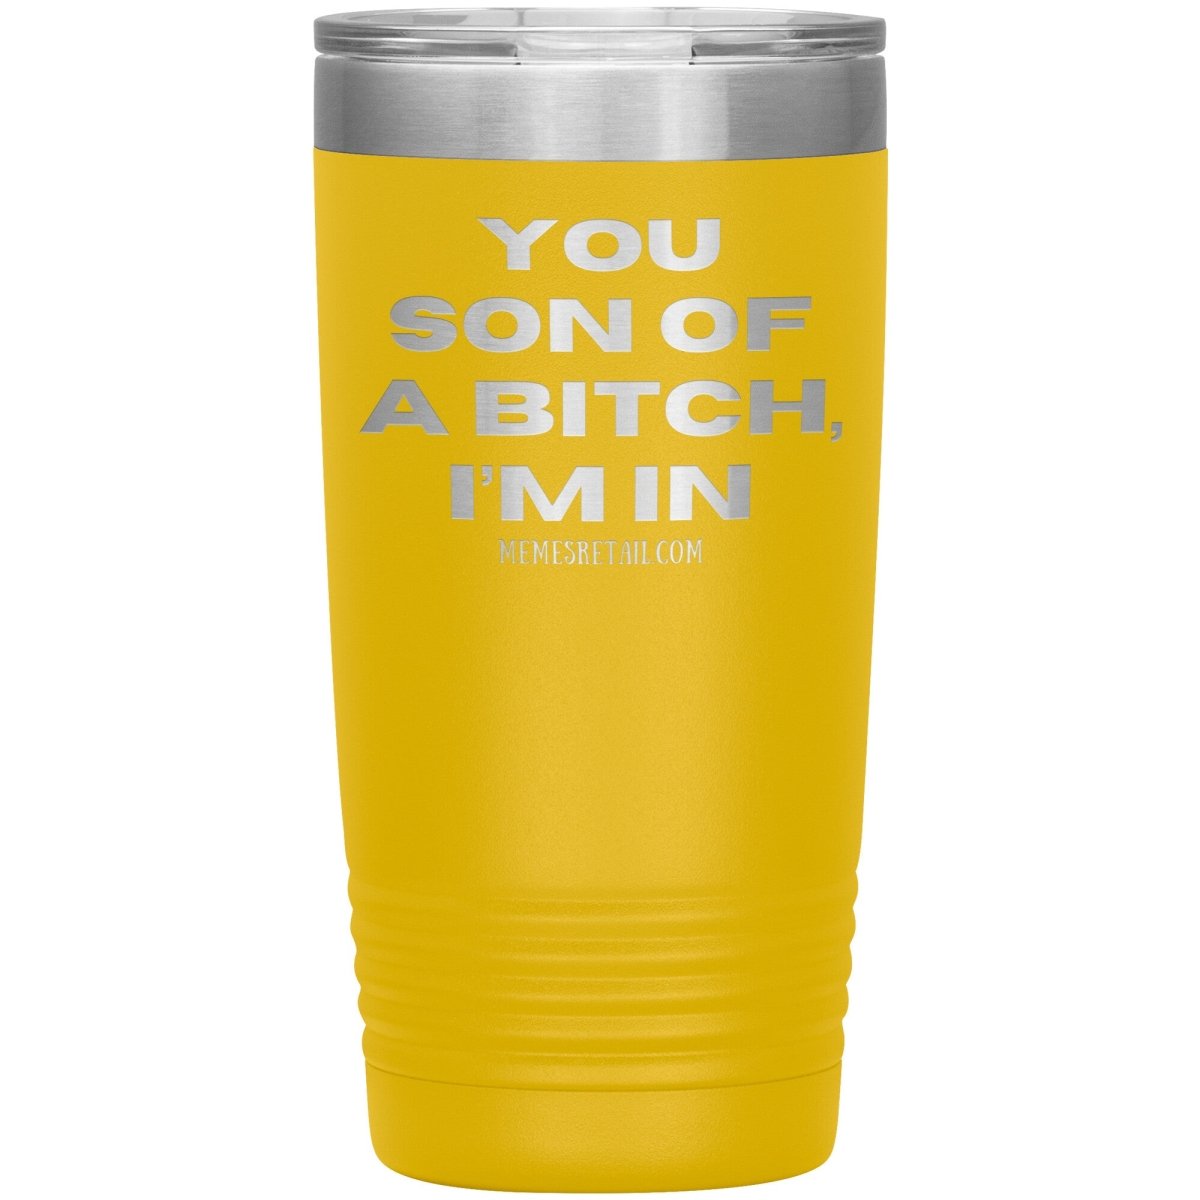 You son of a bitch, I’m in Tumblers, 20oz Insulated Tumbler / Yellow - MemesRetail.com